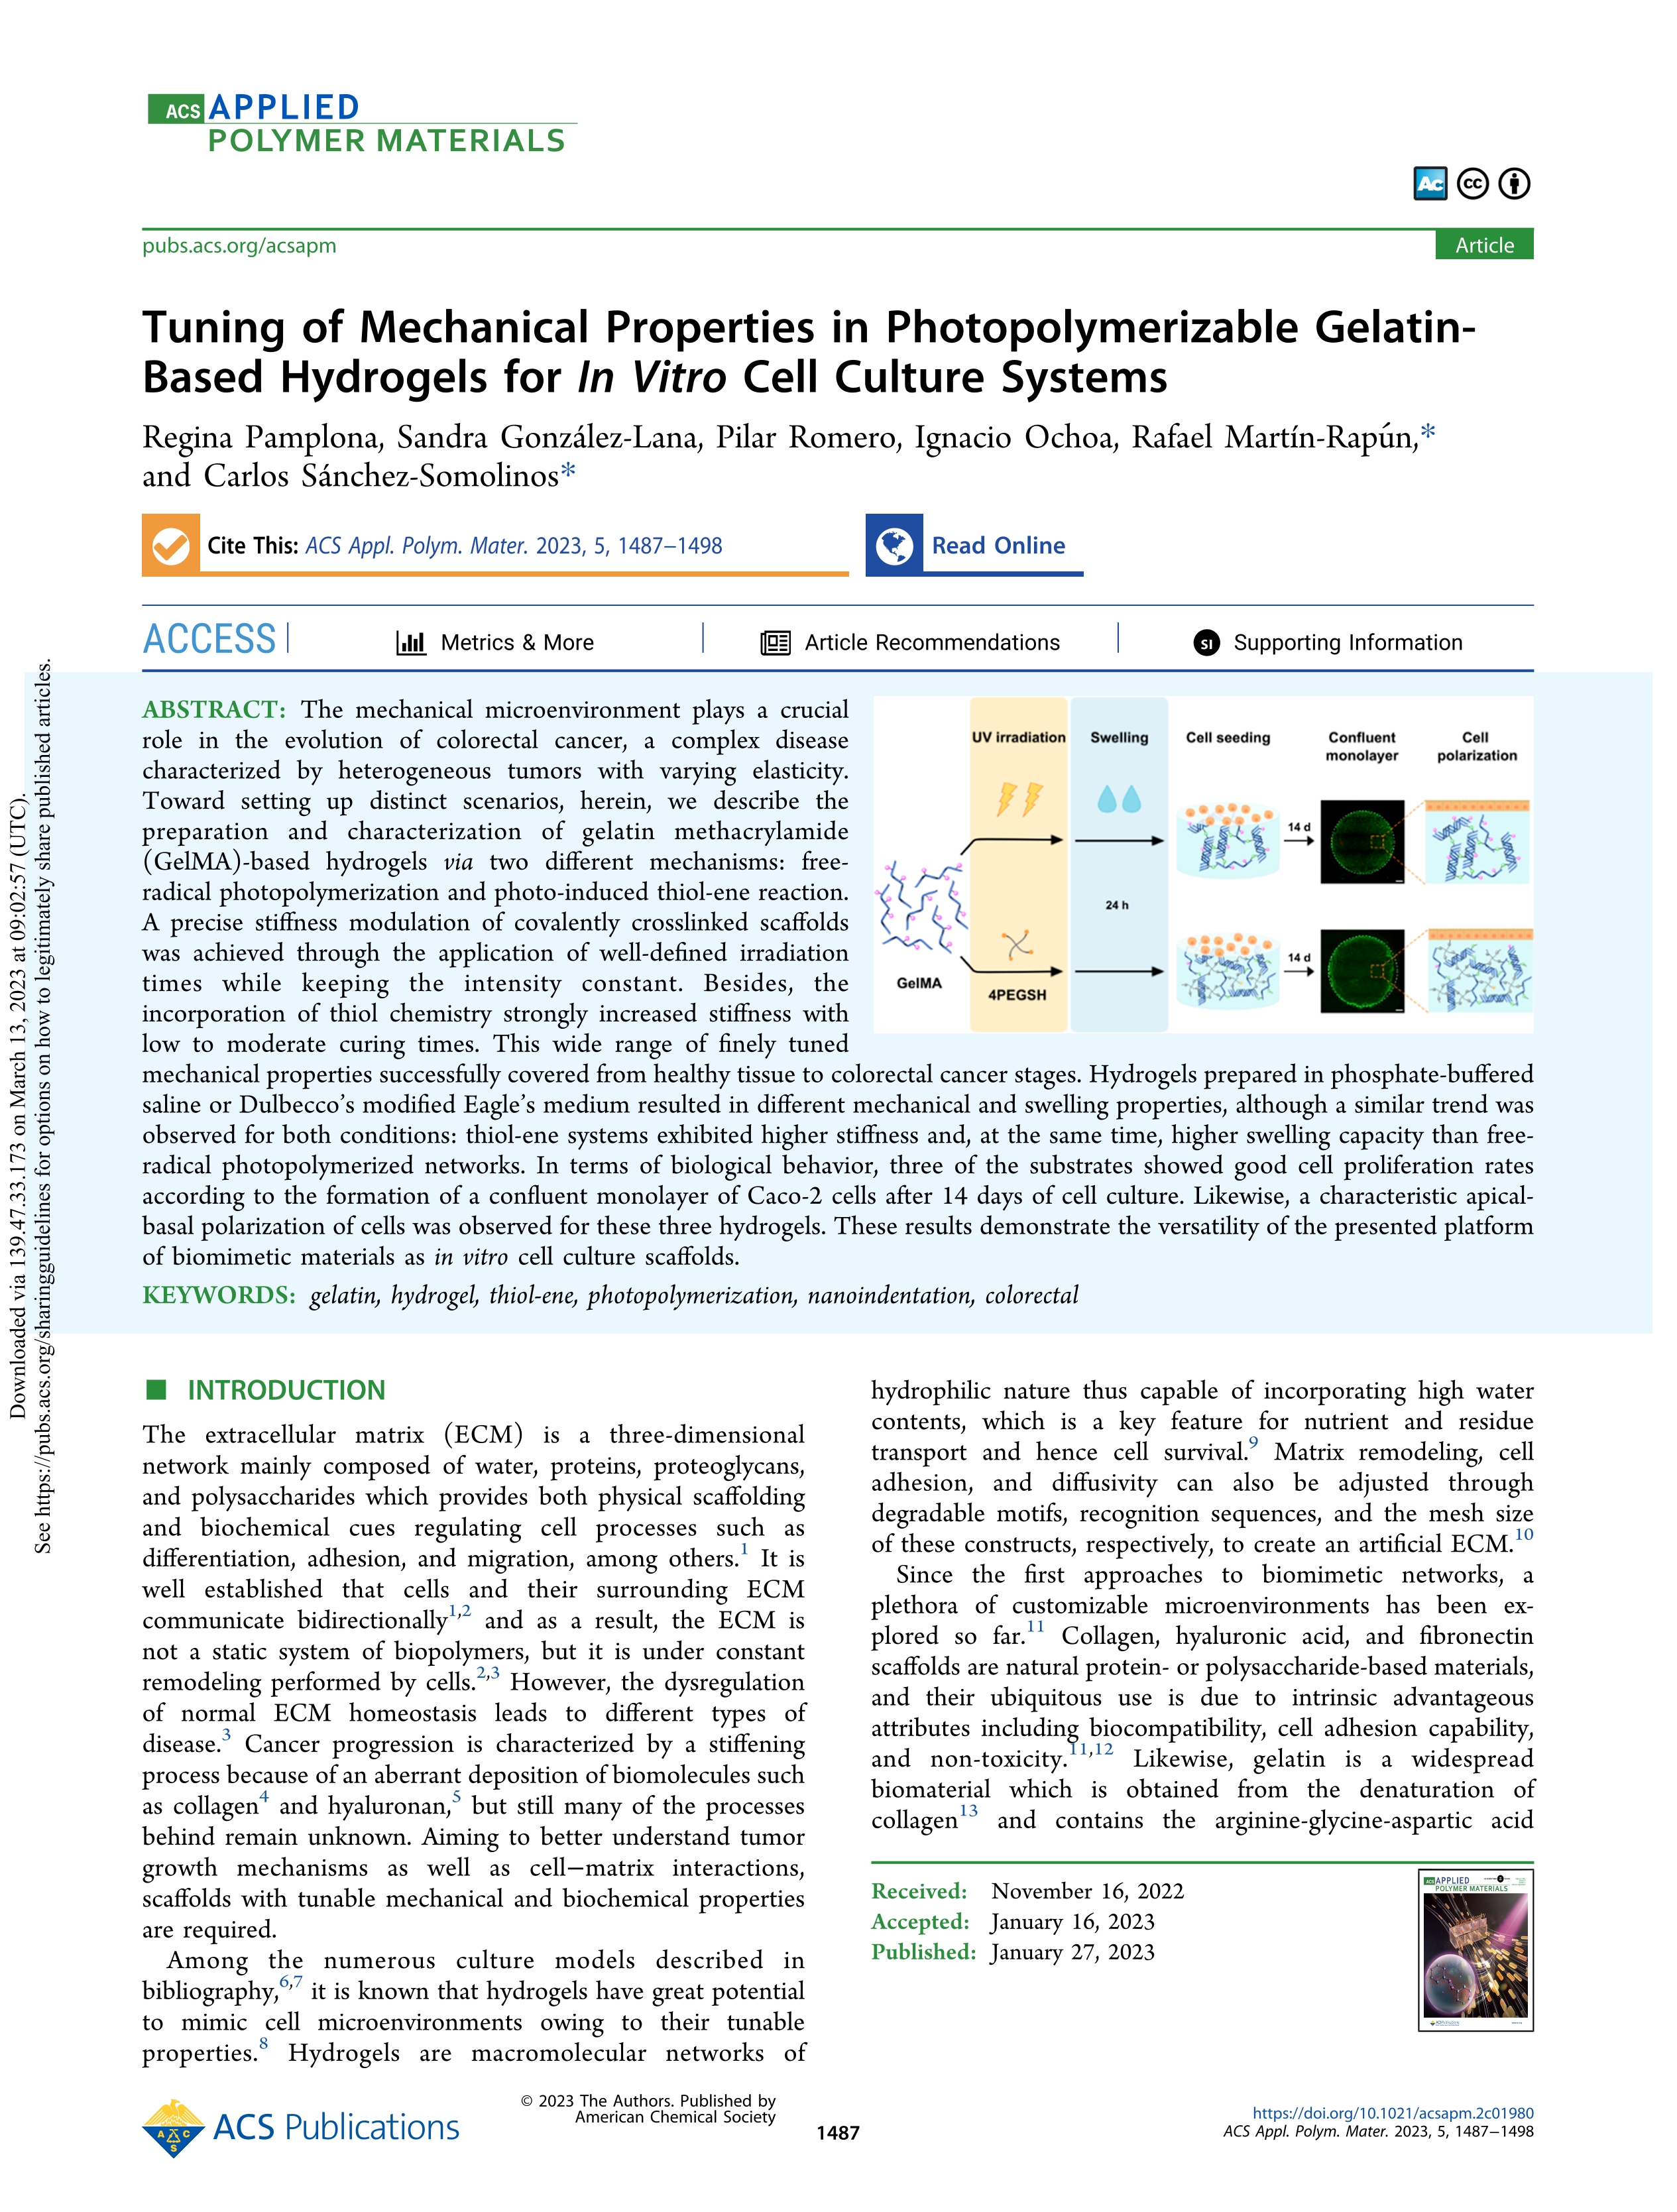 Tuning of Mechanical Properties in Photopolymerizable Gelatin-Based Hydrogels for <i>In Vitro</i> Cell Culture Systems